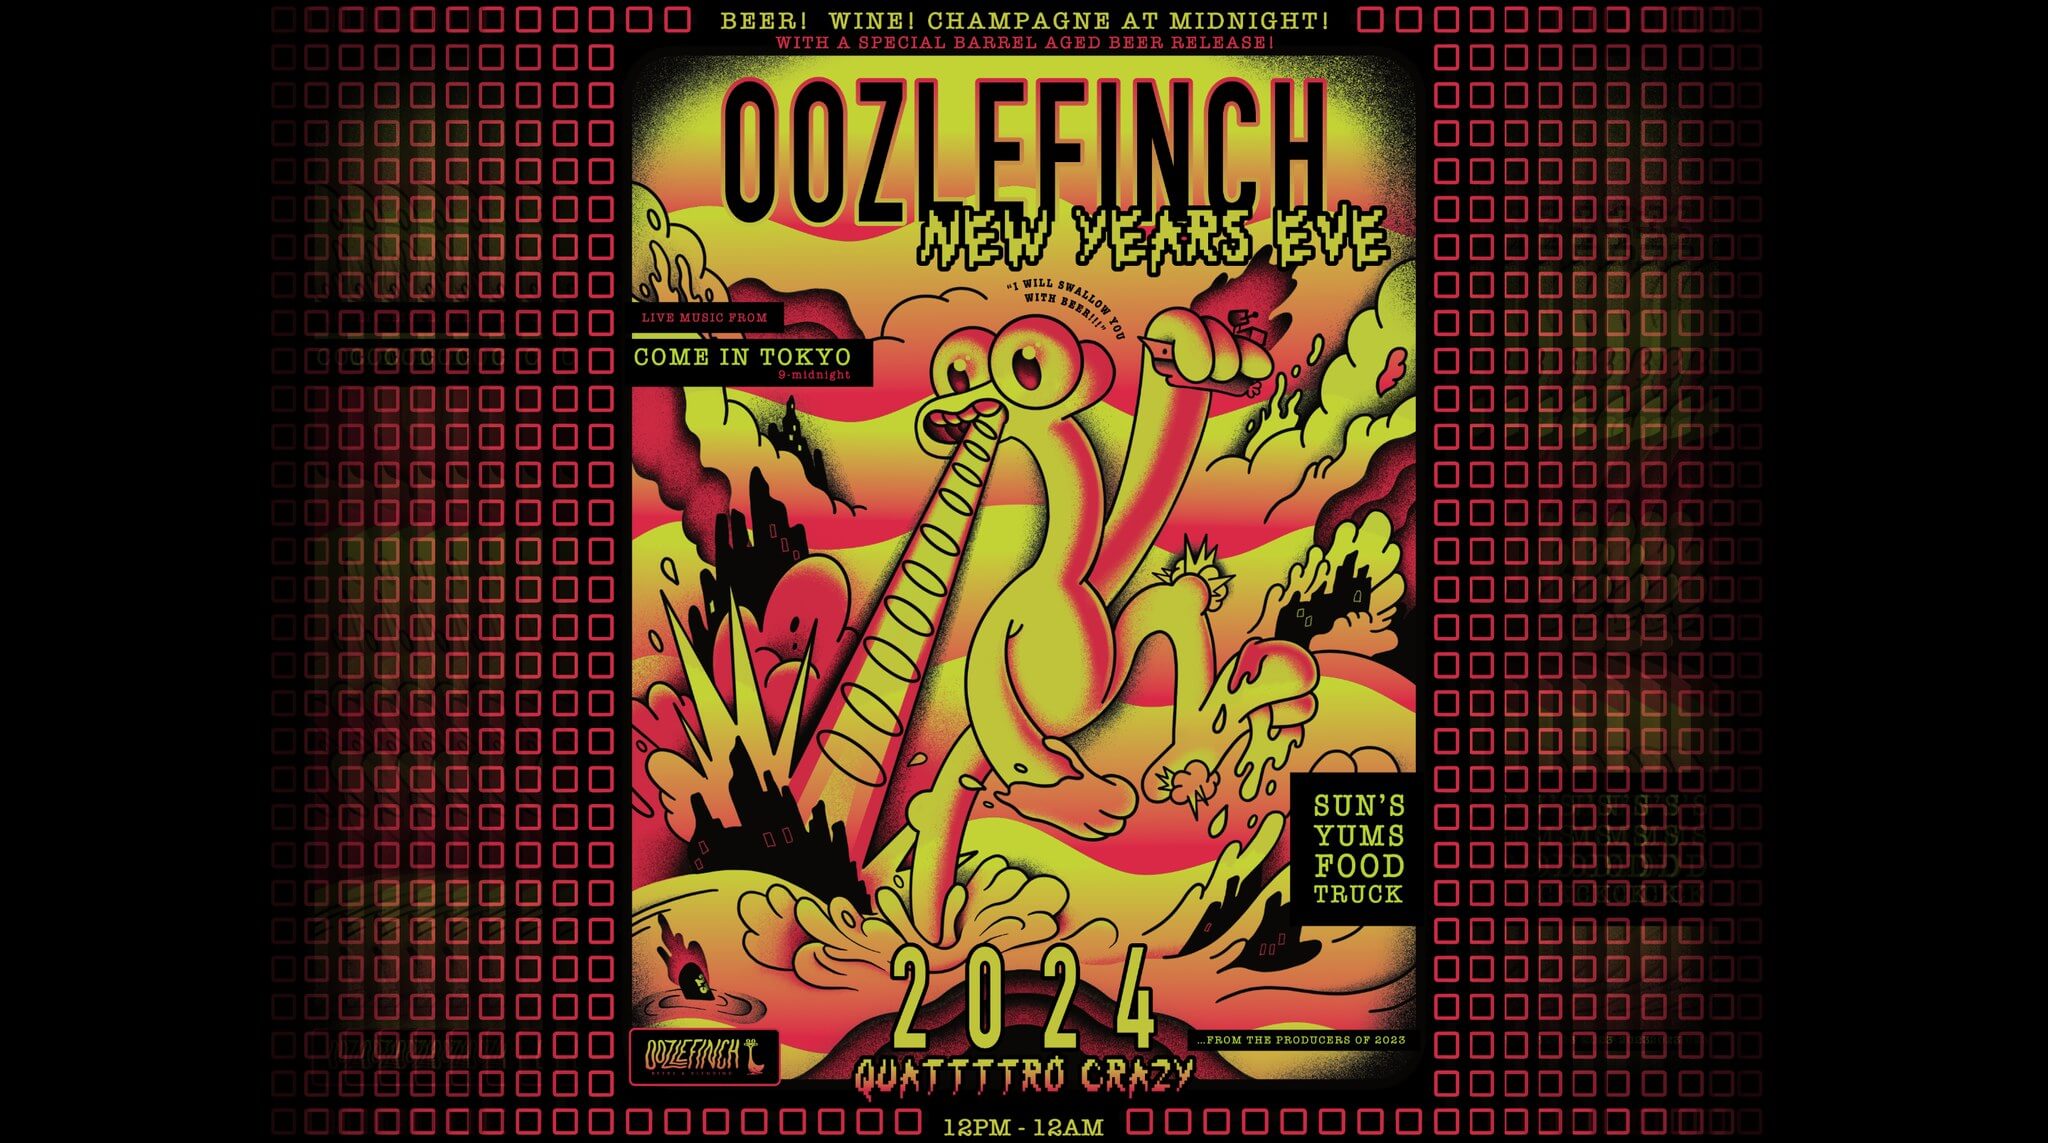 Oozlefinch New Years Eve. Bear! Wine! Champagne at Midnight! With a special barrel aged beer release! Live music from Come In Tokyo. Sun's Yums Food Truck. 2024 Quattttro Crazy 12-12